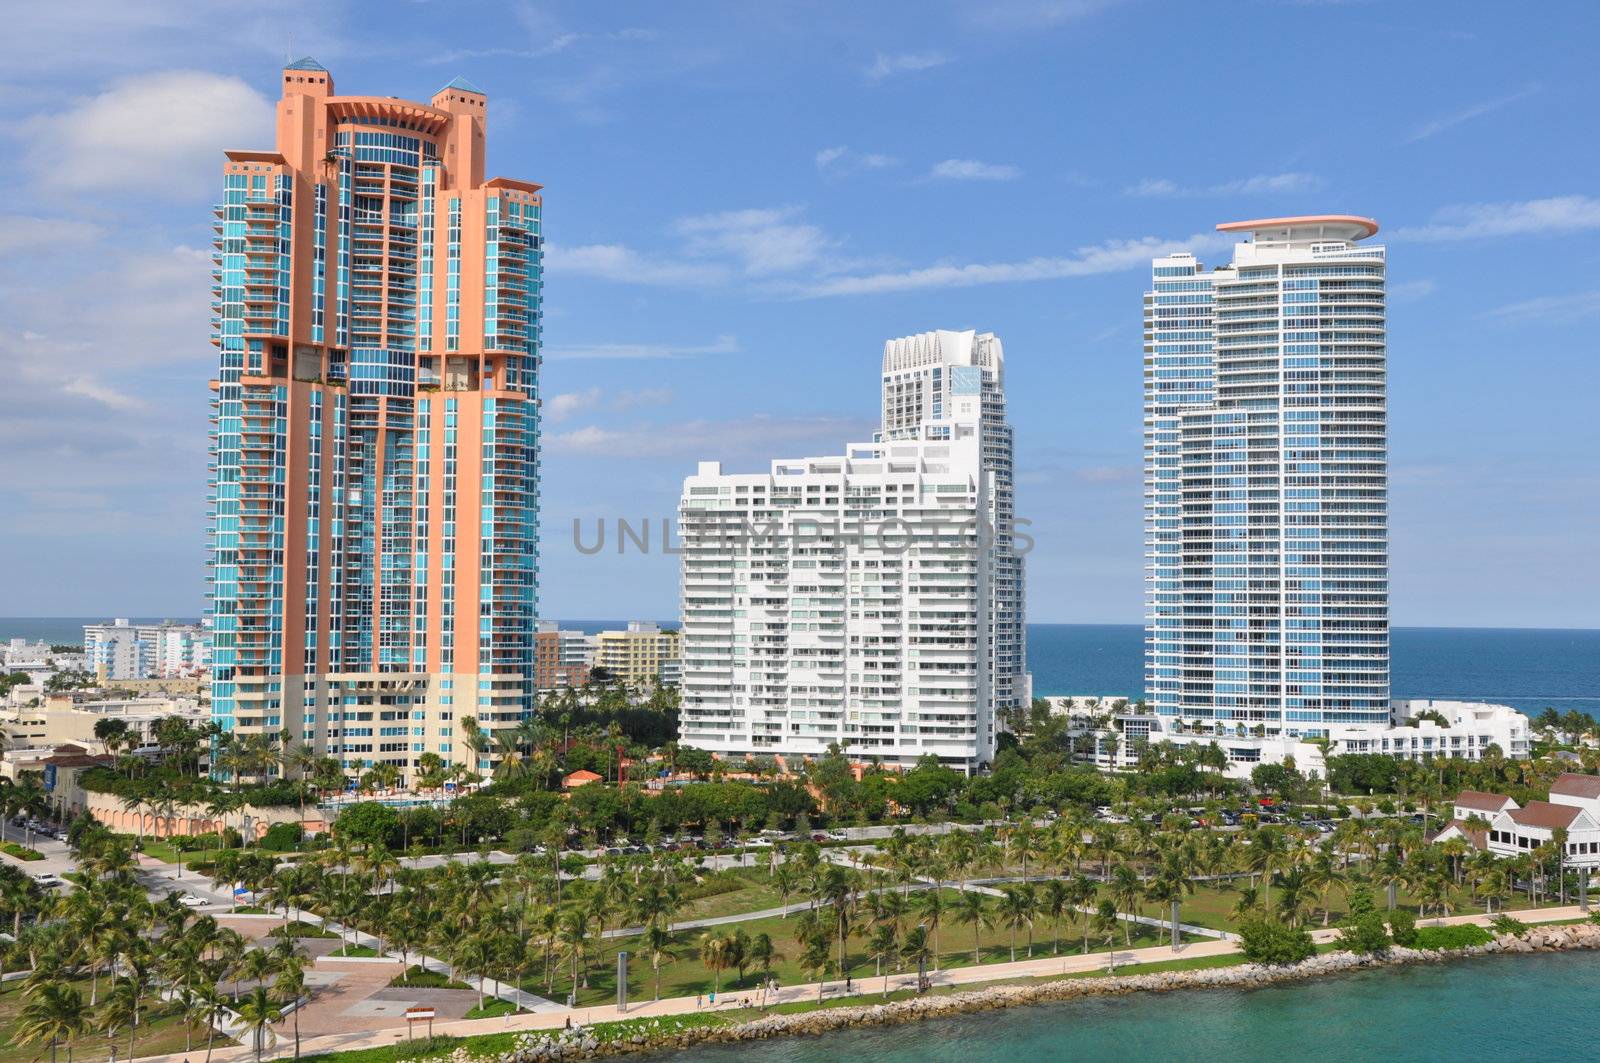 View of Miami in Florida